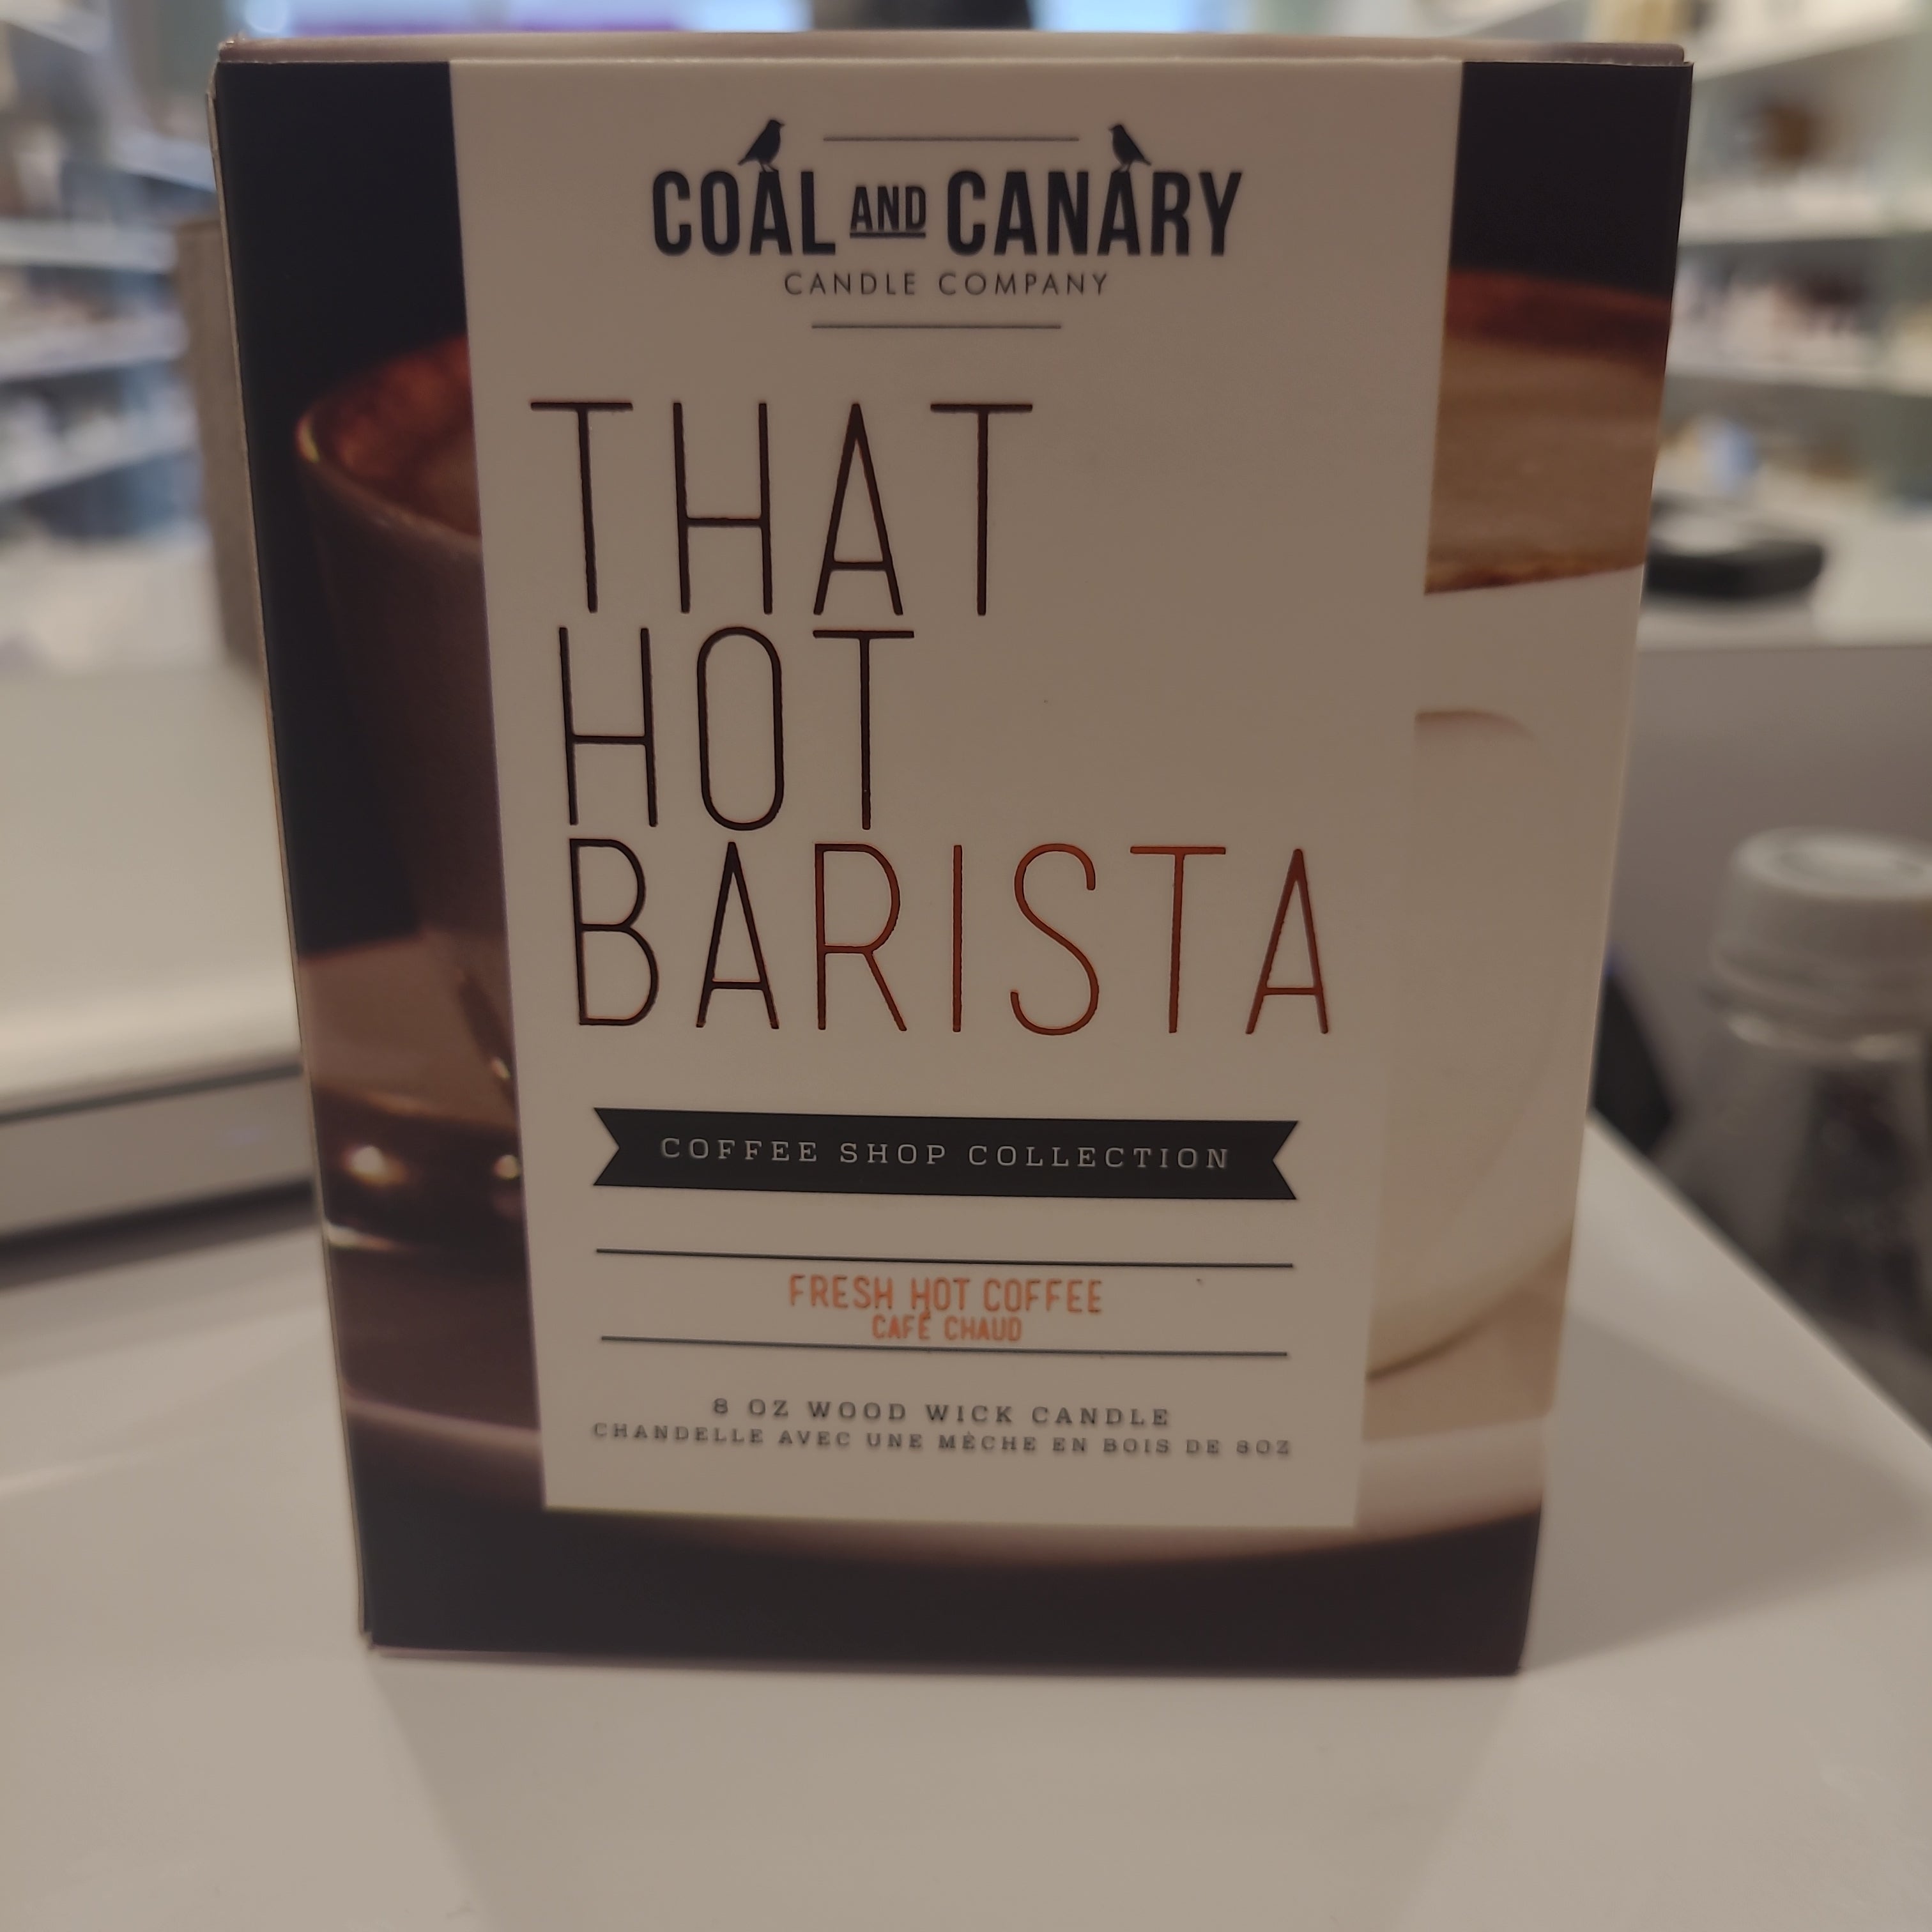 Coal and canary- That hot barista